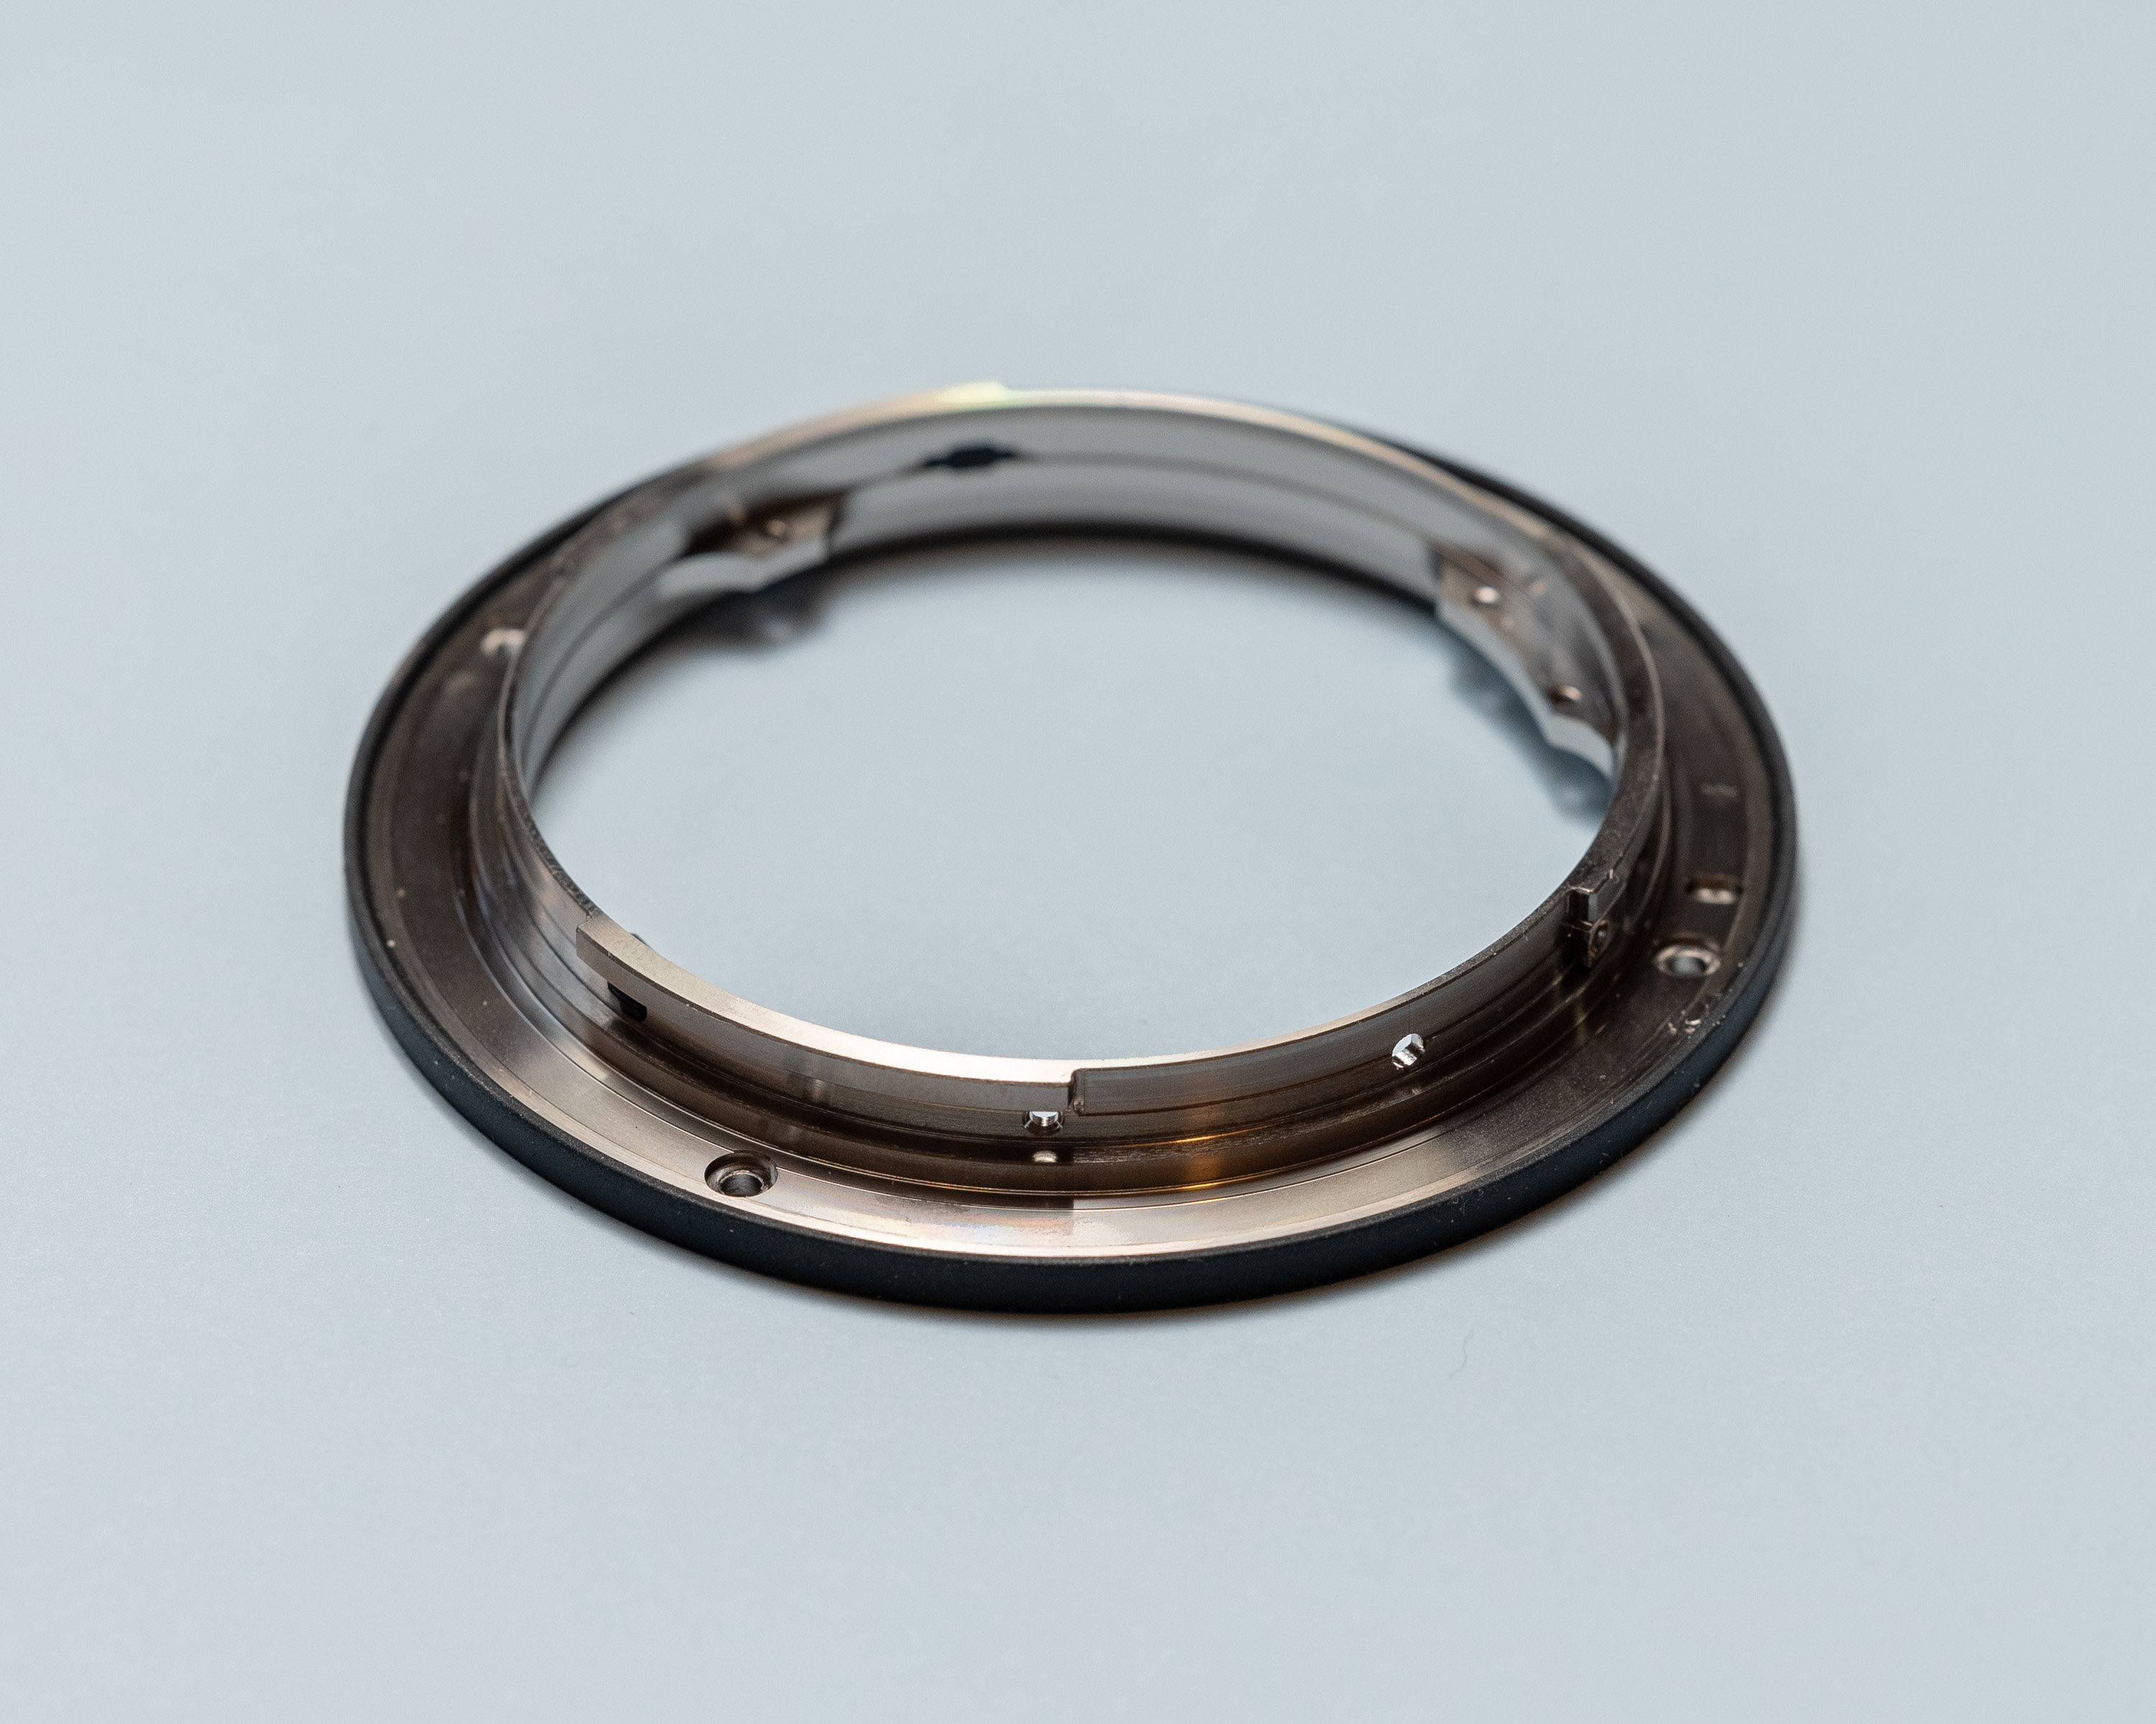 Machined metal ring with 3 overhang features for retention